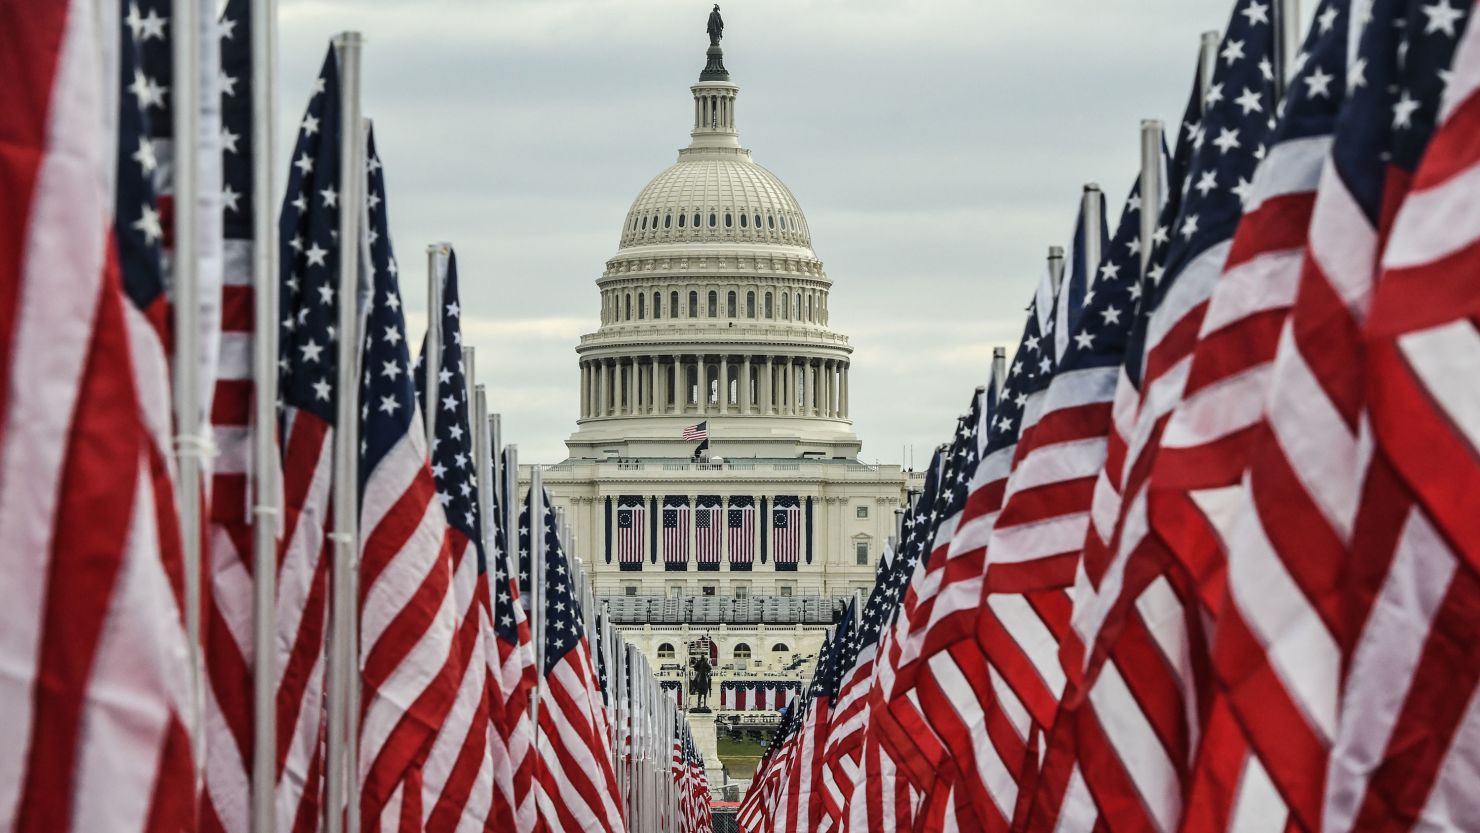 The Capitol building is surrounded by American flags a day before the inauguration of President-elect Joe Biden. 